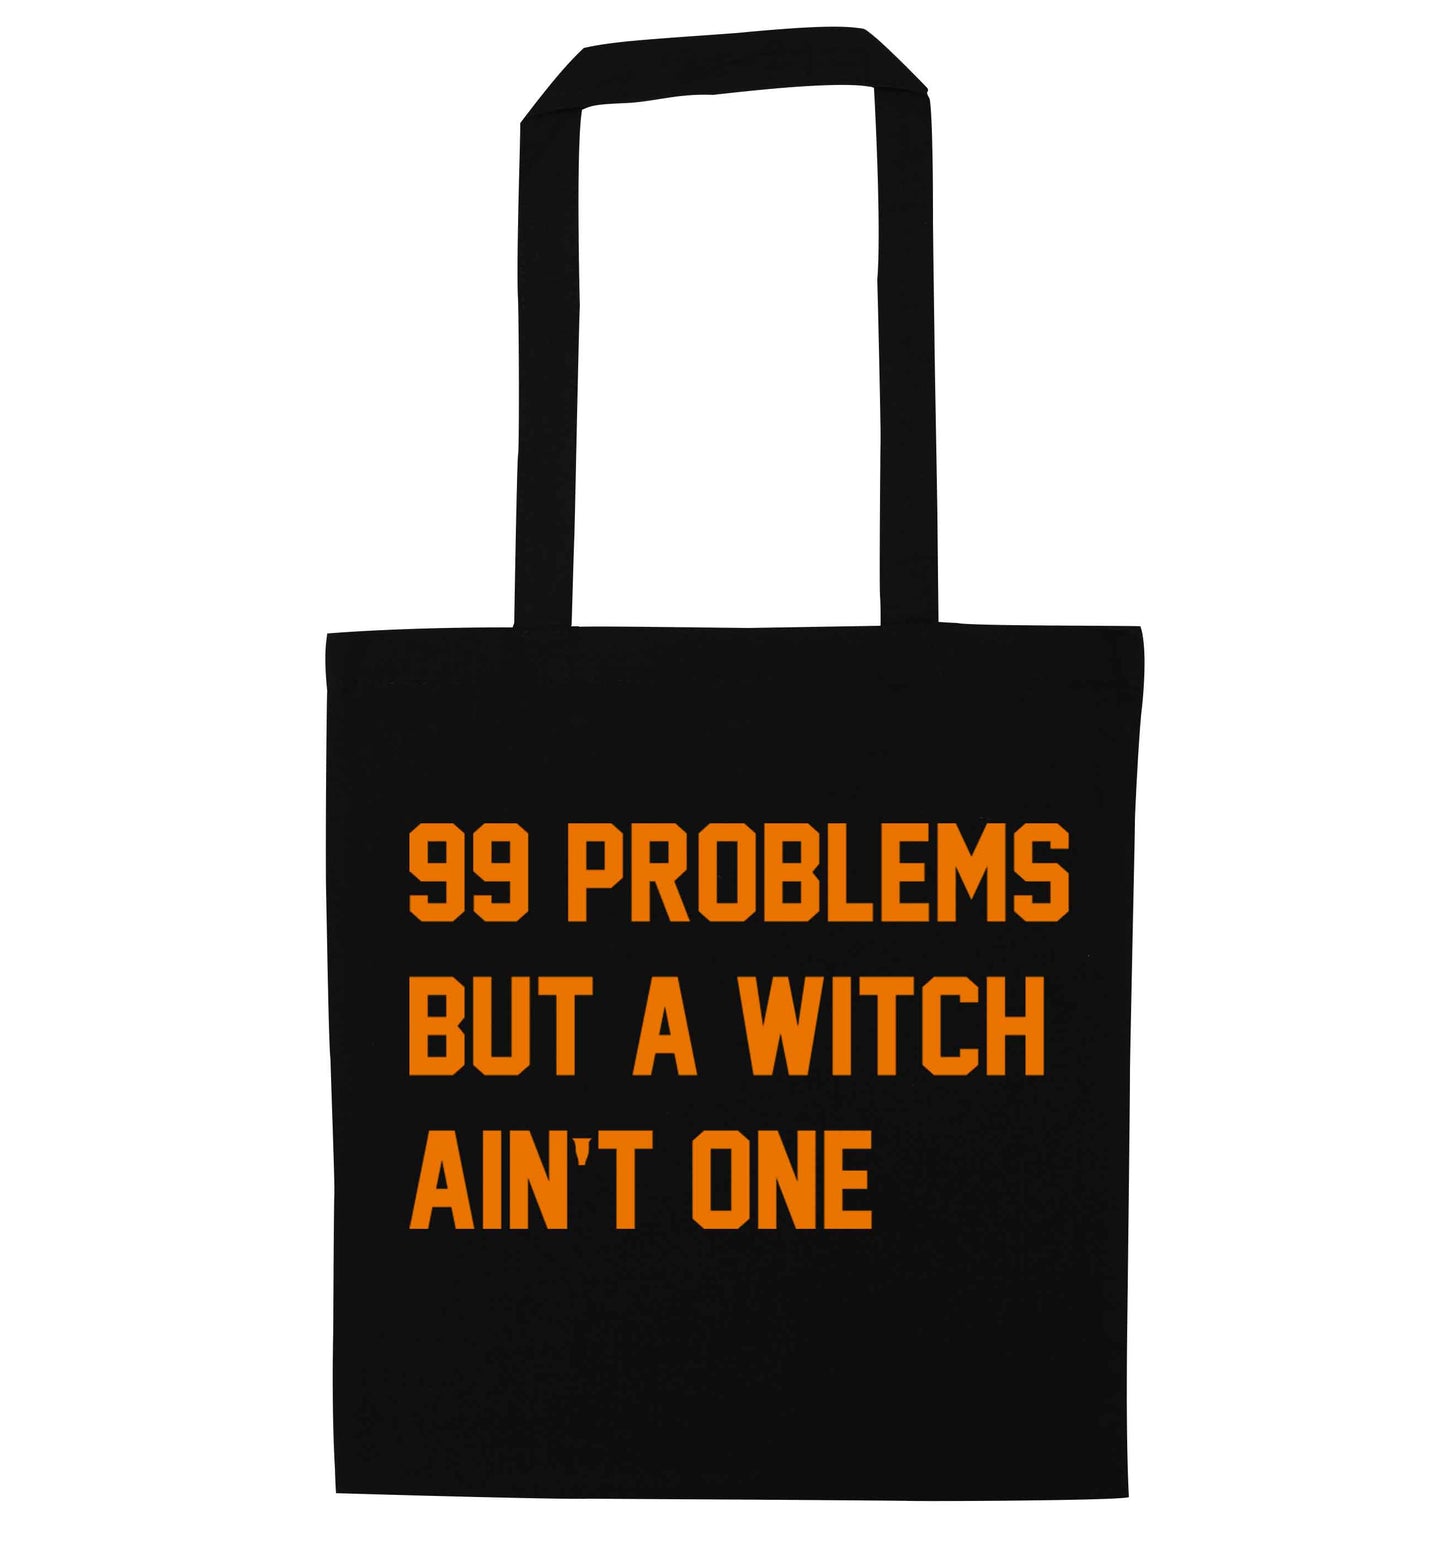 99 Problems but a witch aint one black tote bag